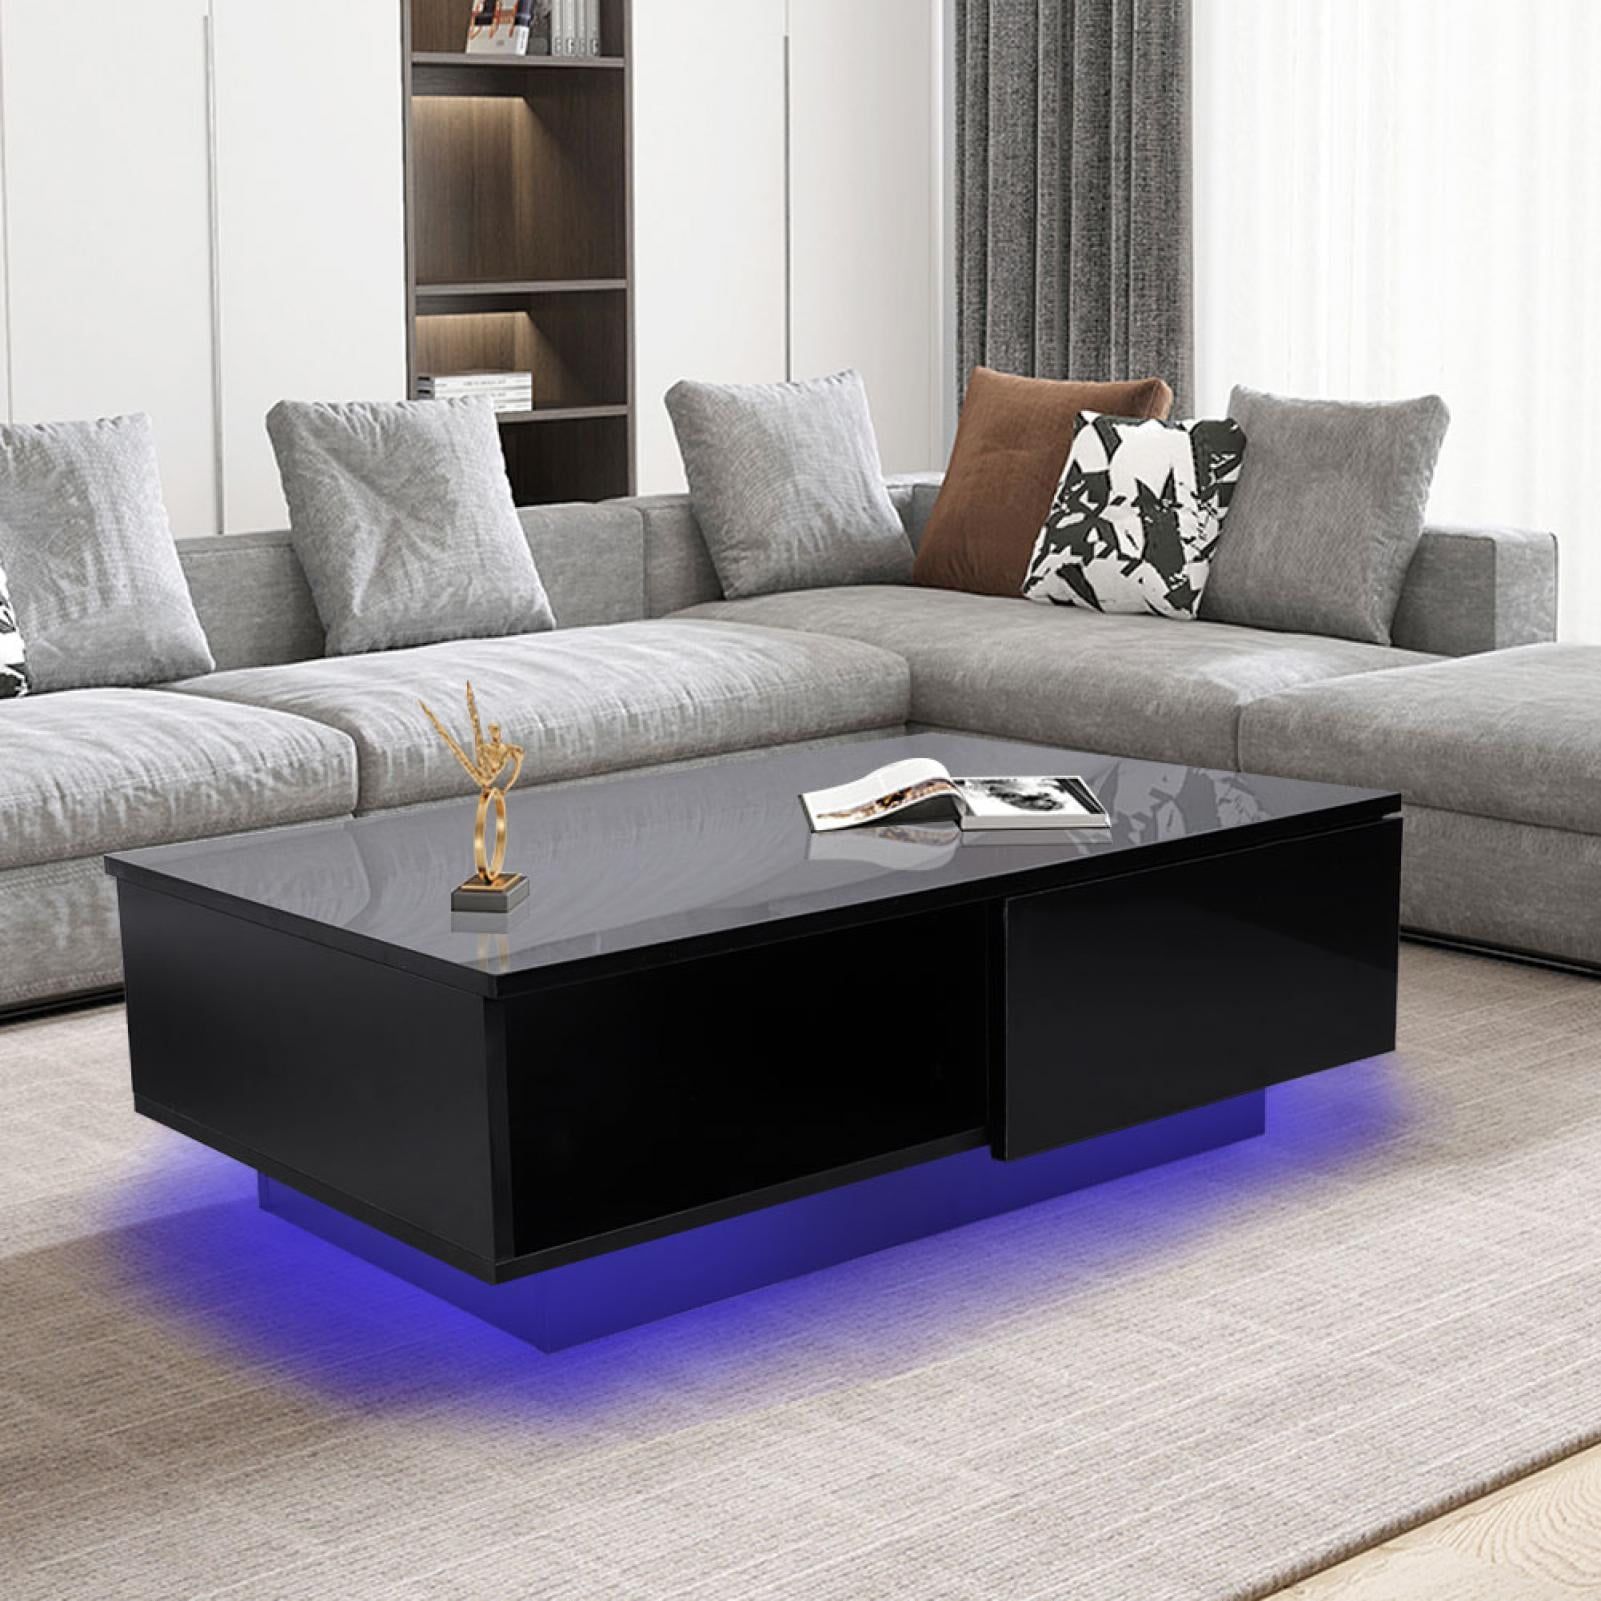 Ebtools Rectangle Led Coffee Table, Black Modern High Gloss Furniture Pertaining To Led Coffee Tables With 4 Drawers (View 10 of 20)